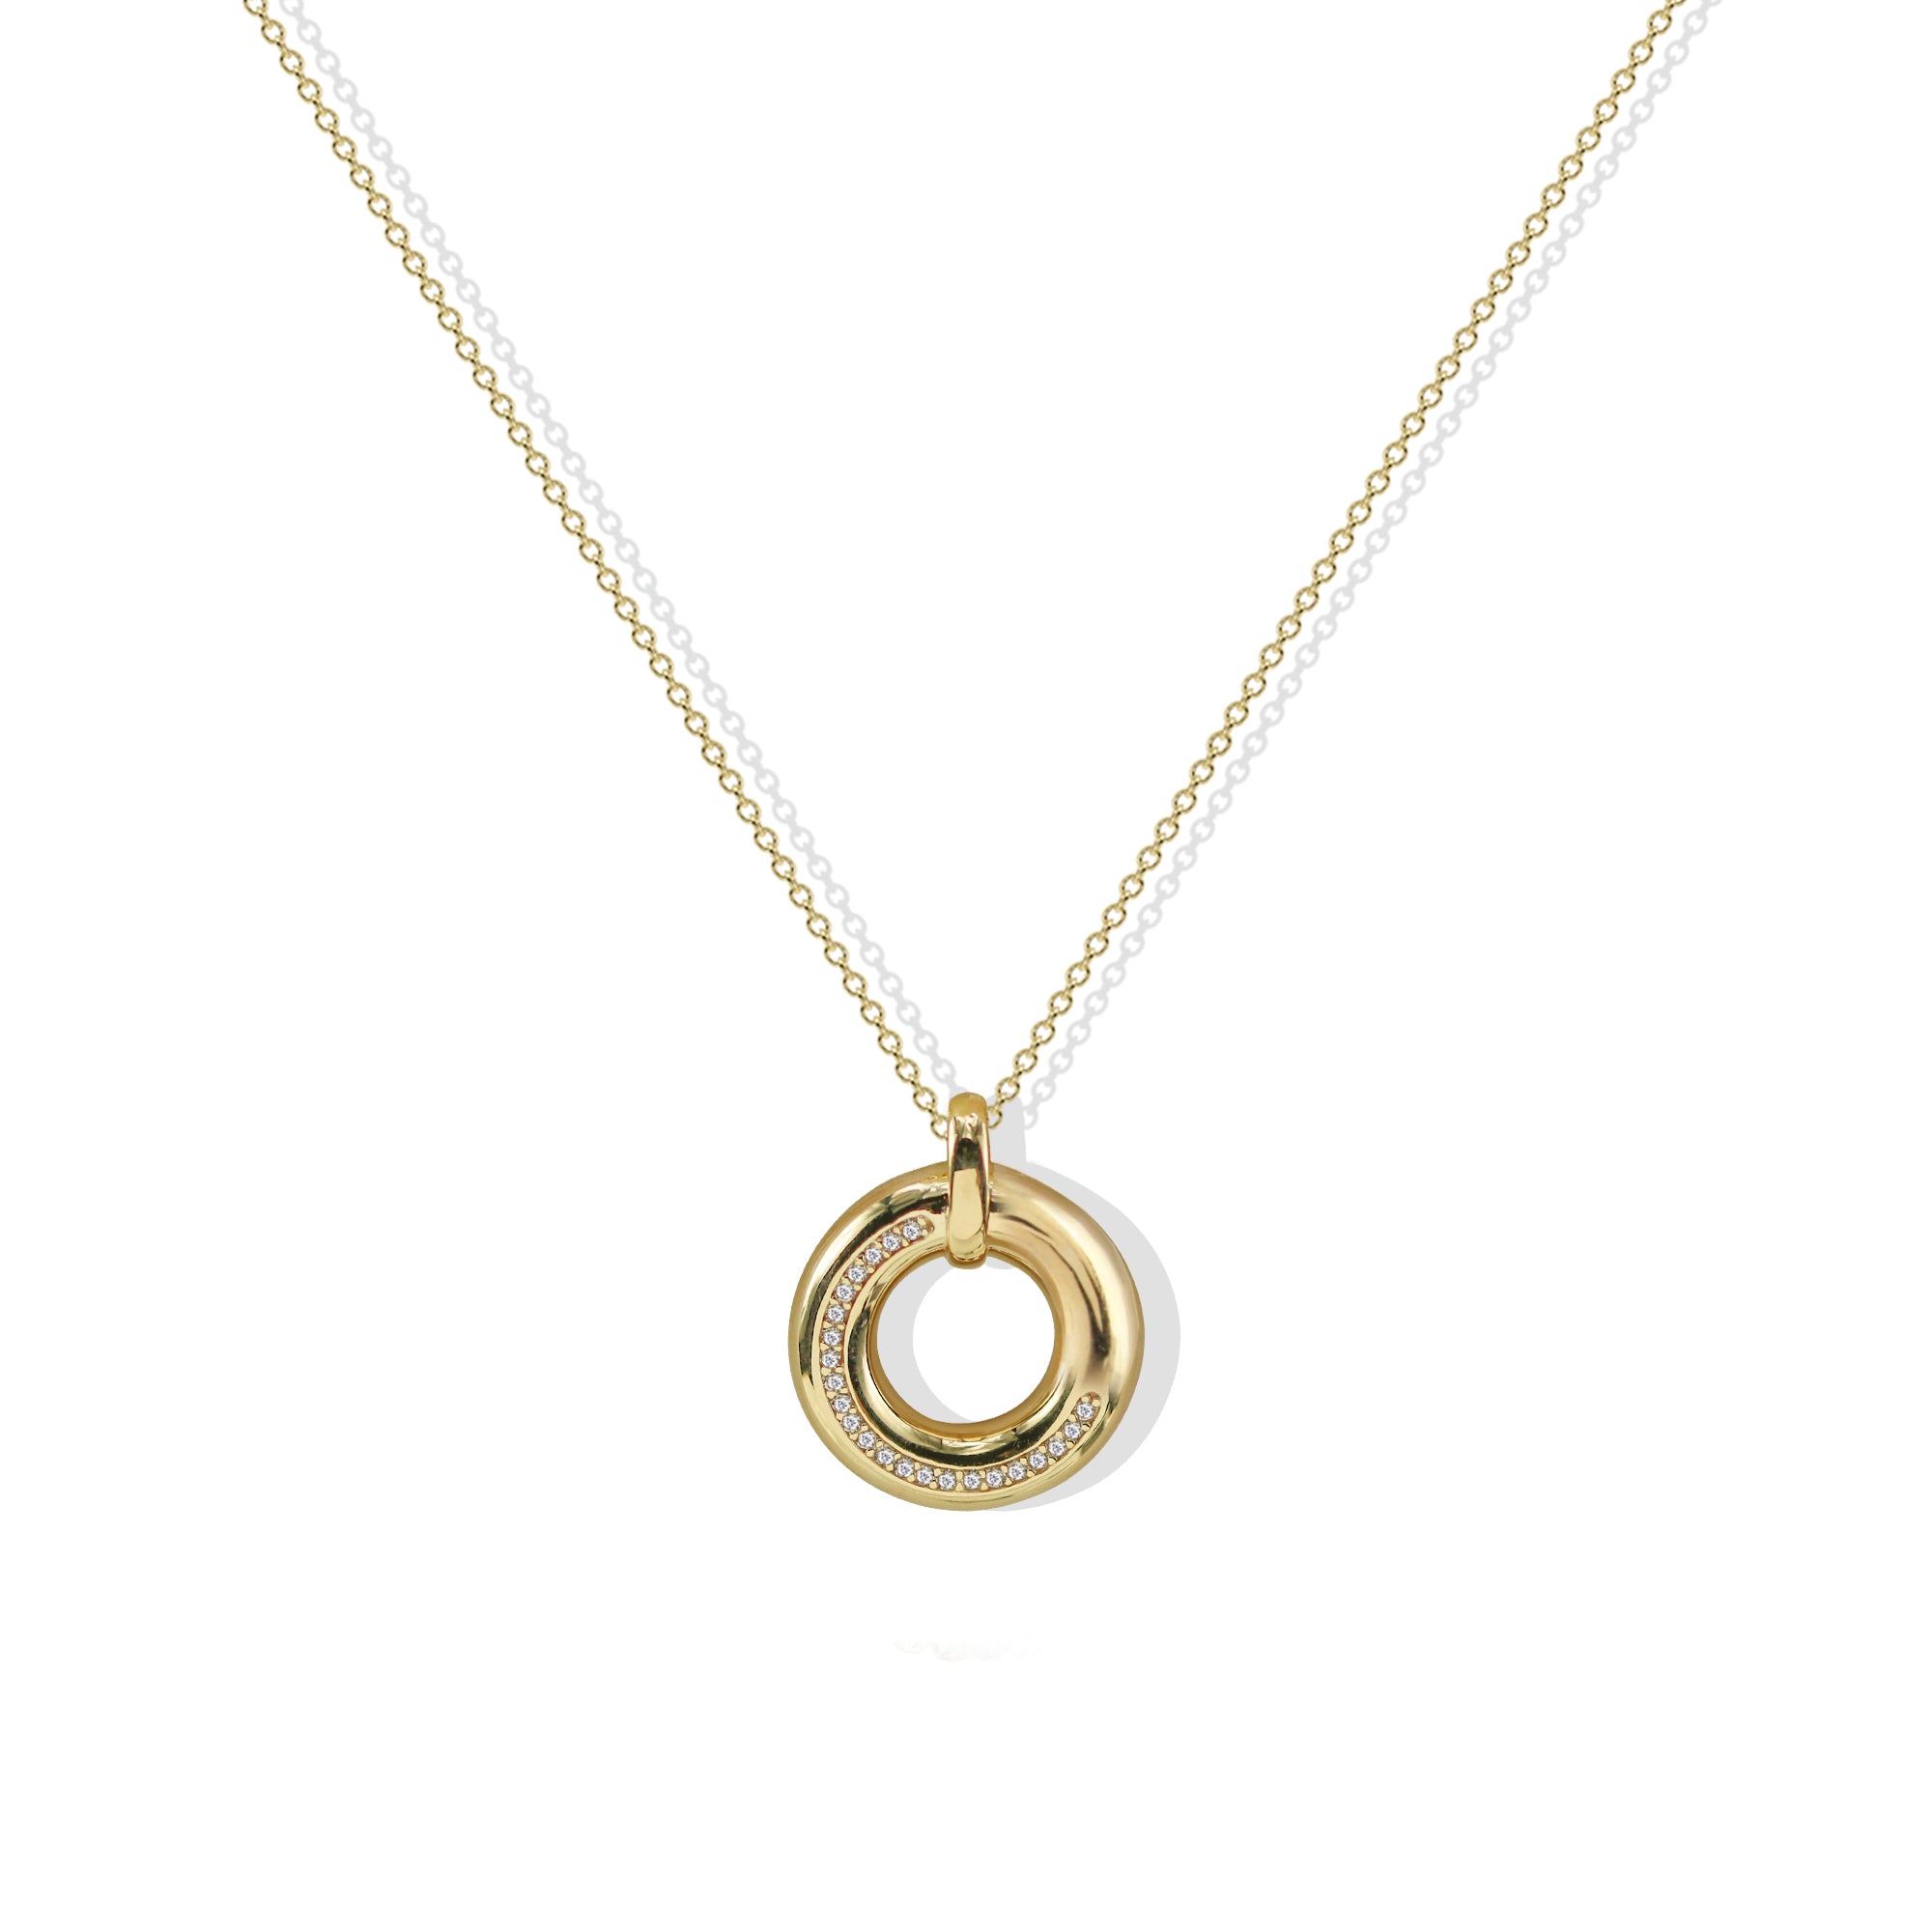 THE SMALL CIRCLE PENDANT NECKLACE